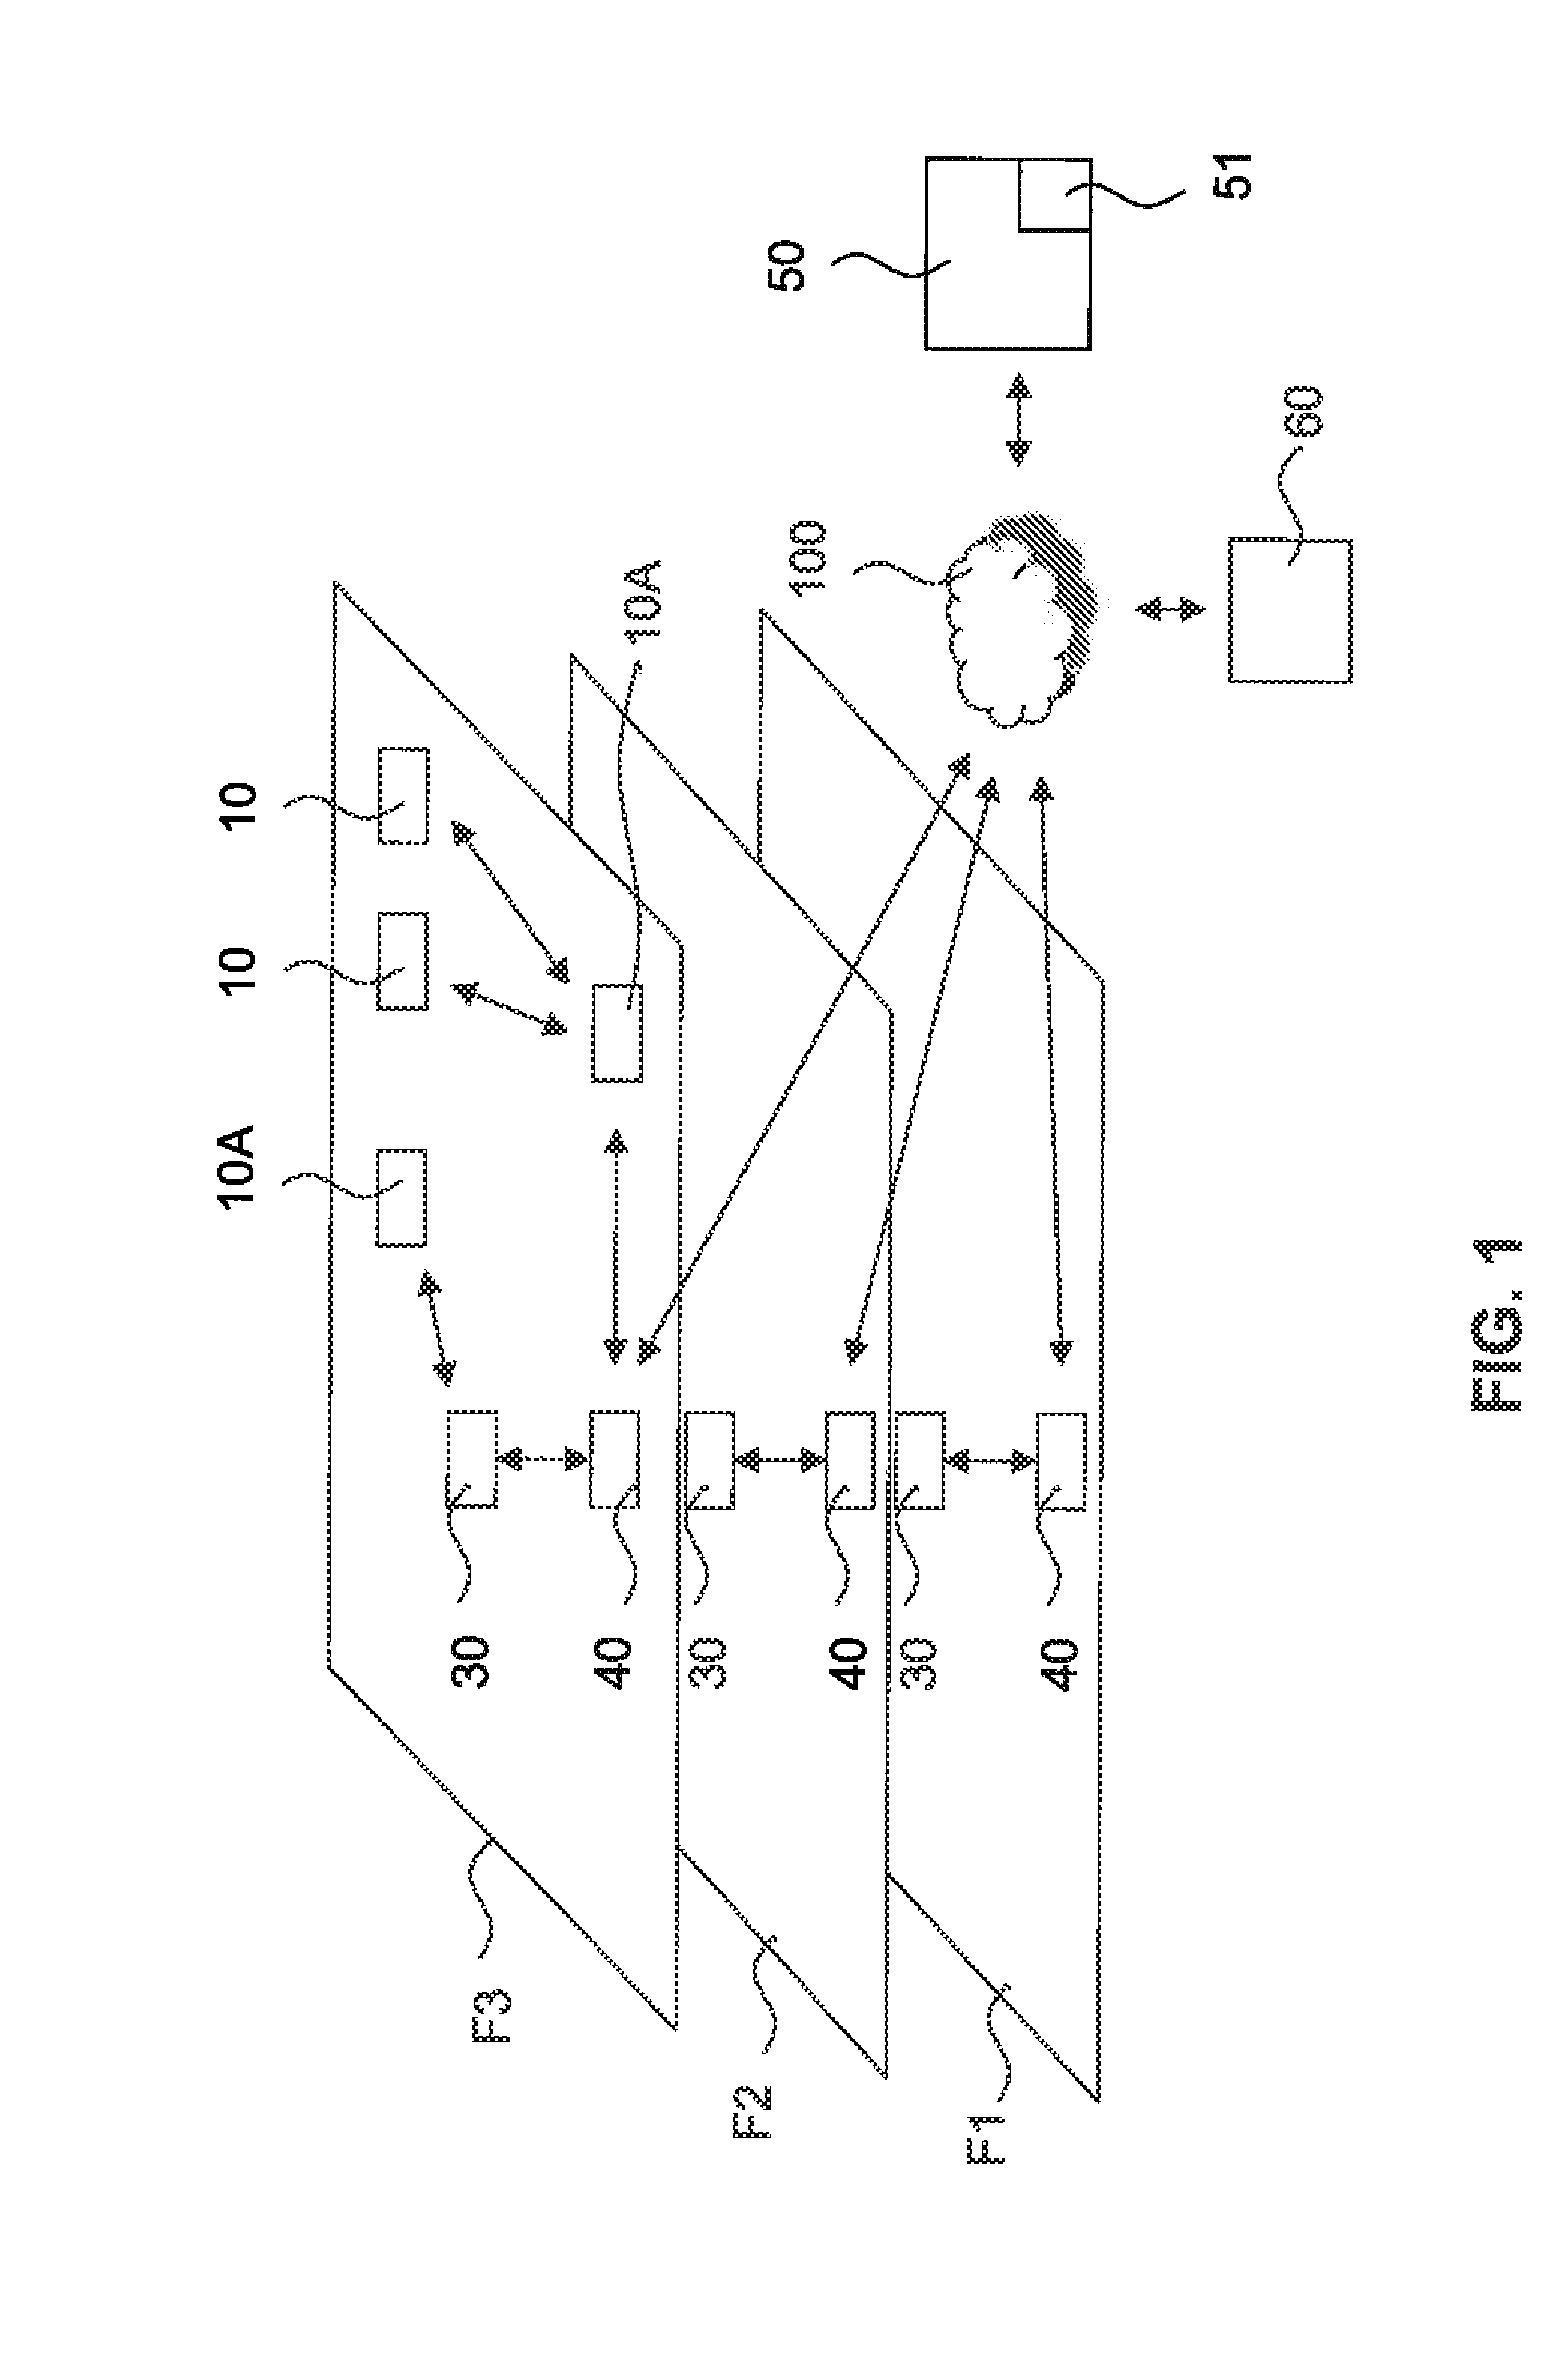 System for managing the use of premises